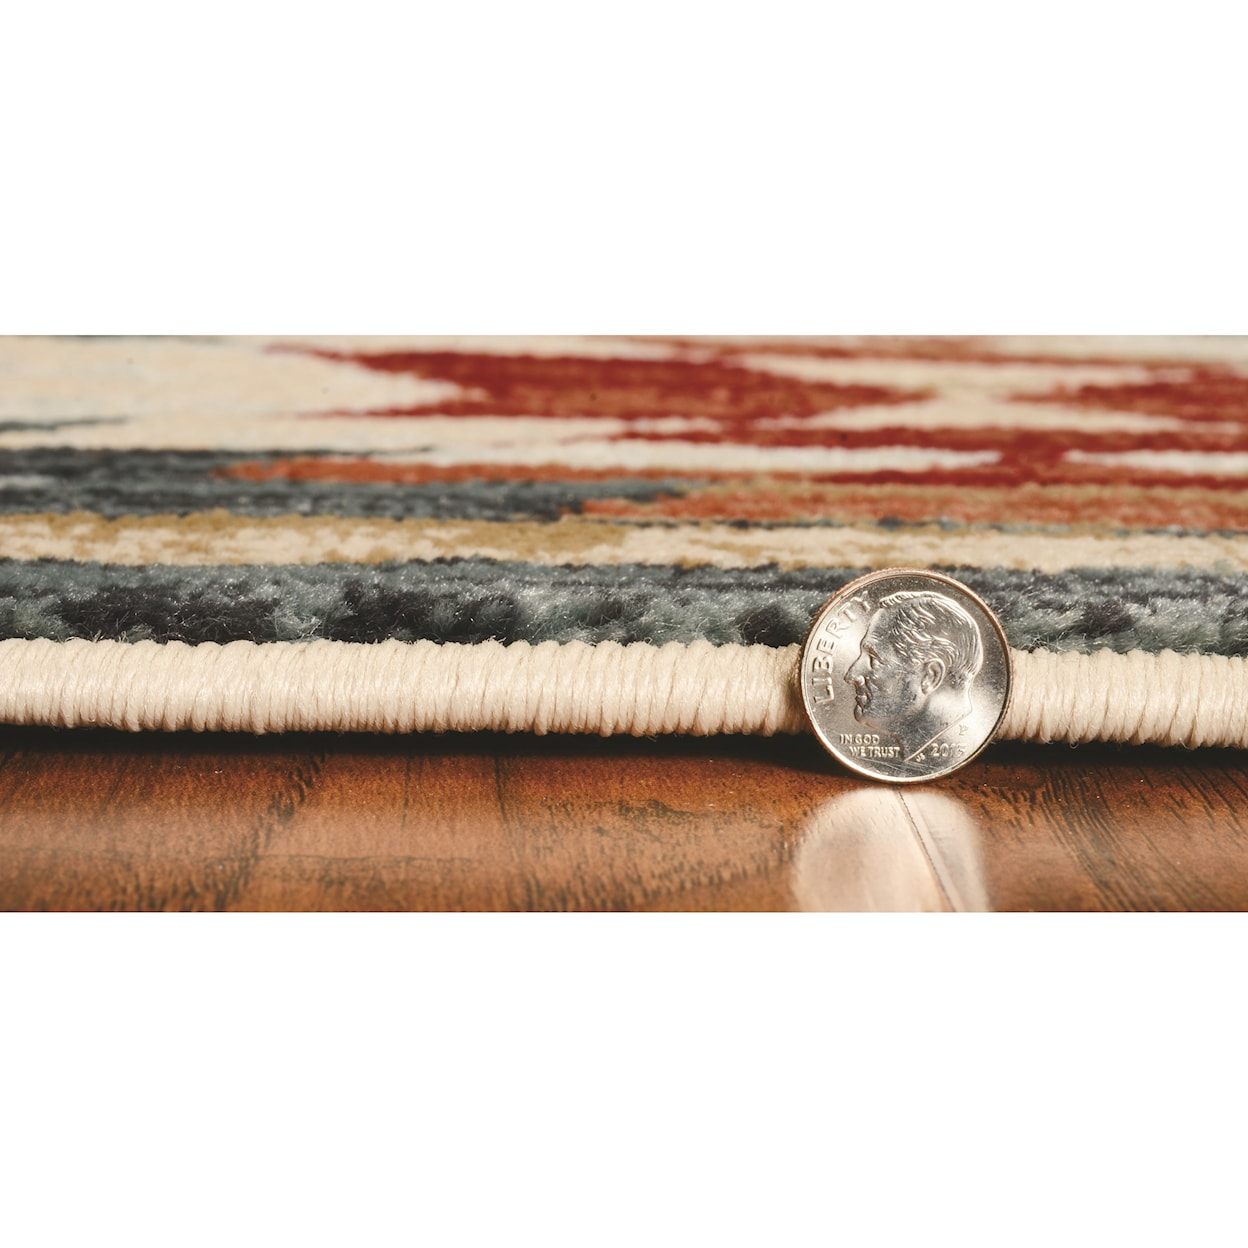 Kas Chester 7'10" Round Ivory Pines Rug